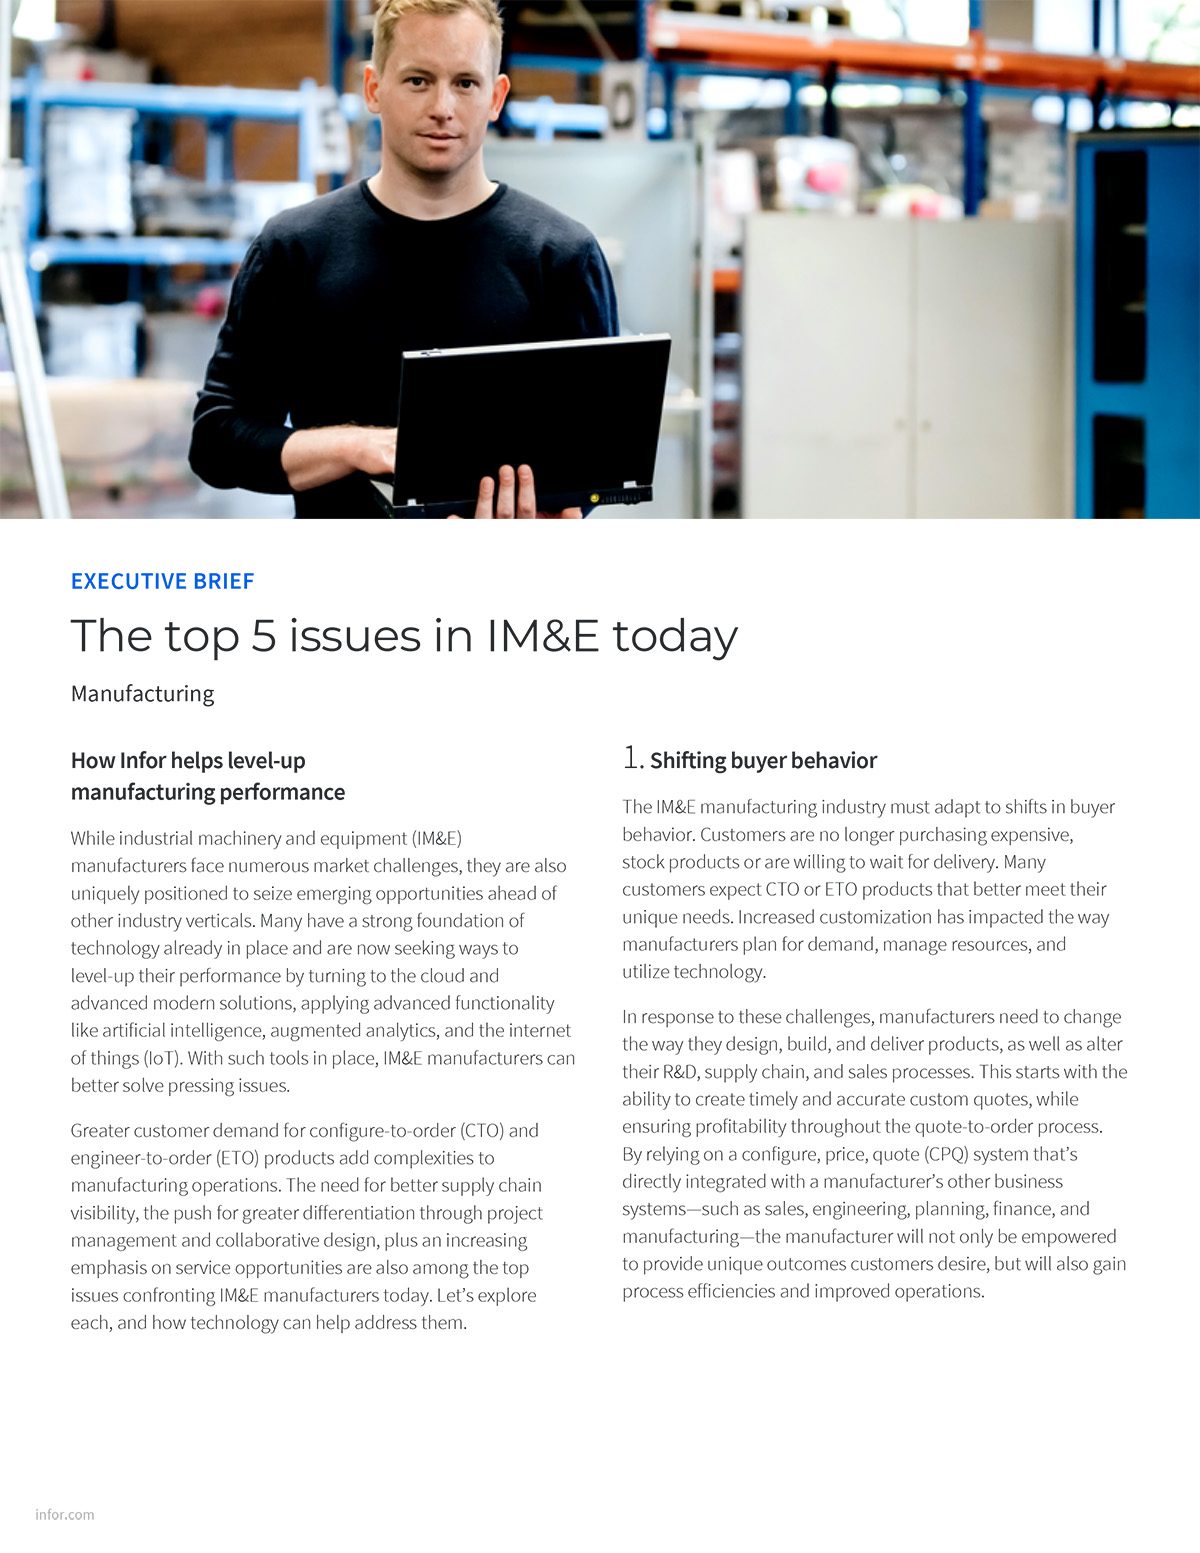 Top 5 Issues in IME Today